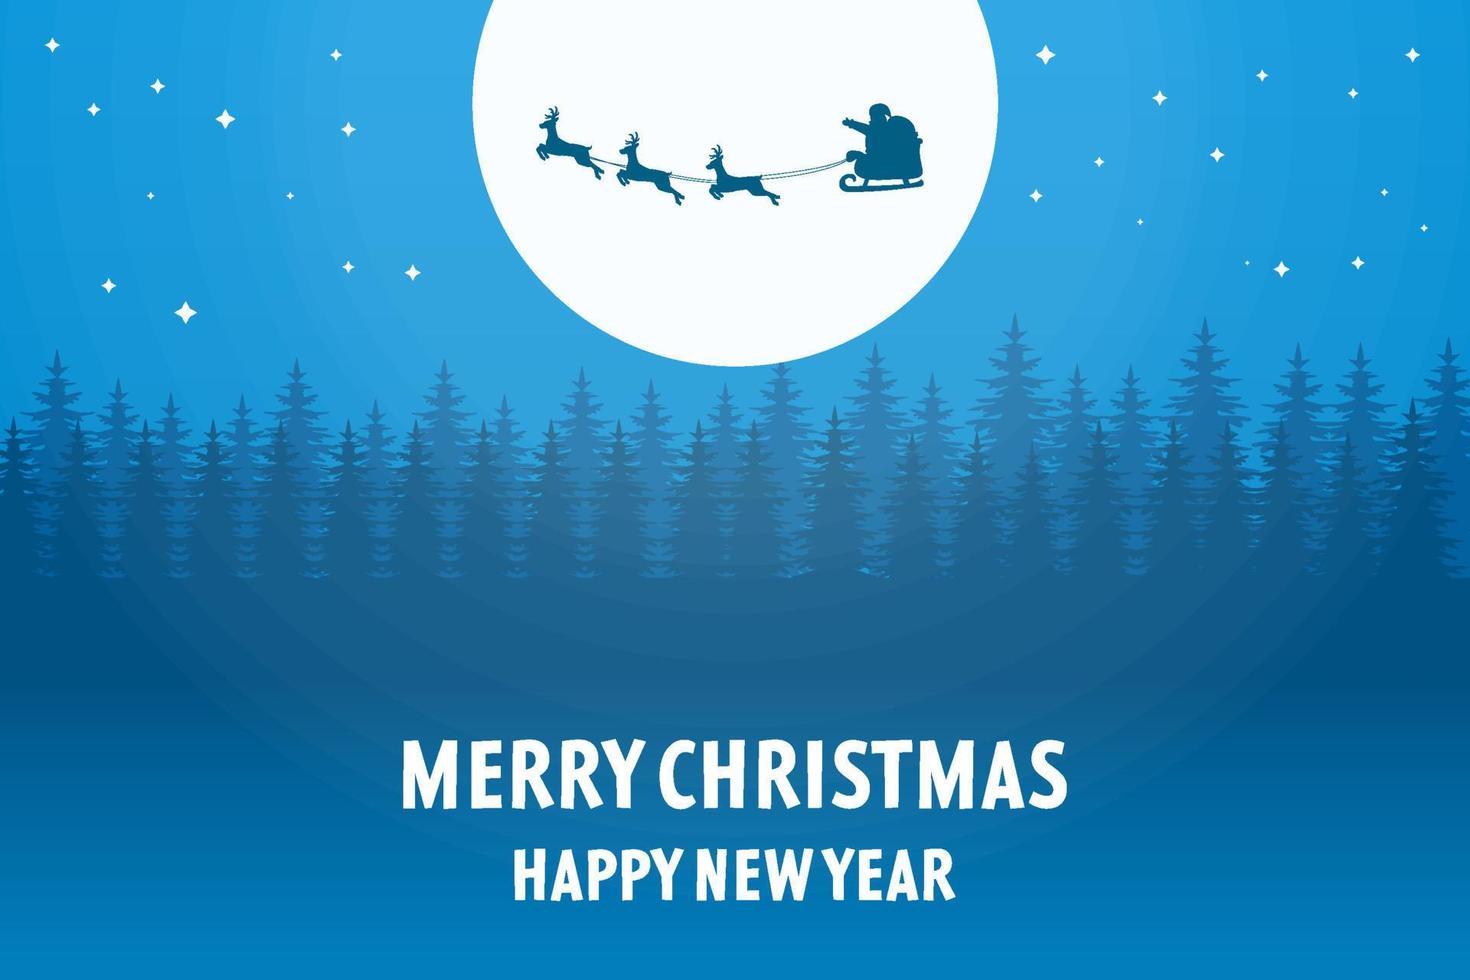 merry christmas and happy new year background with silhouette santa claus riding flying deer vector